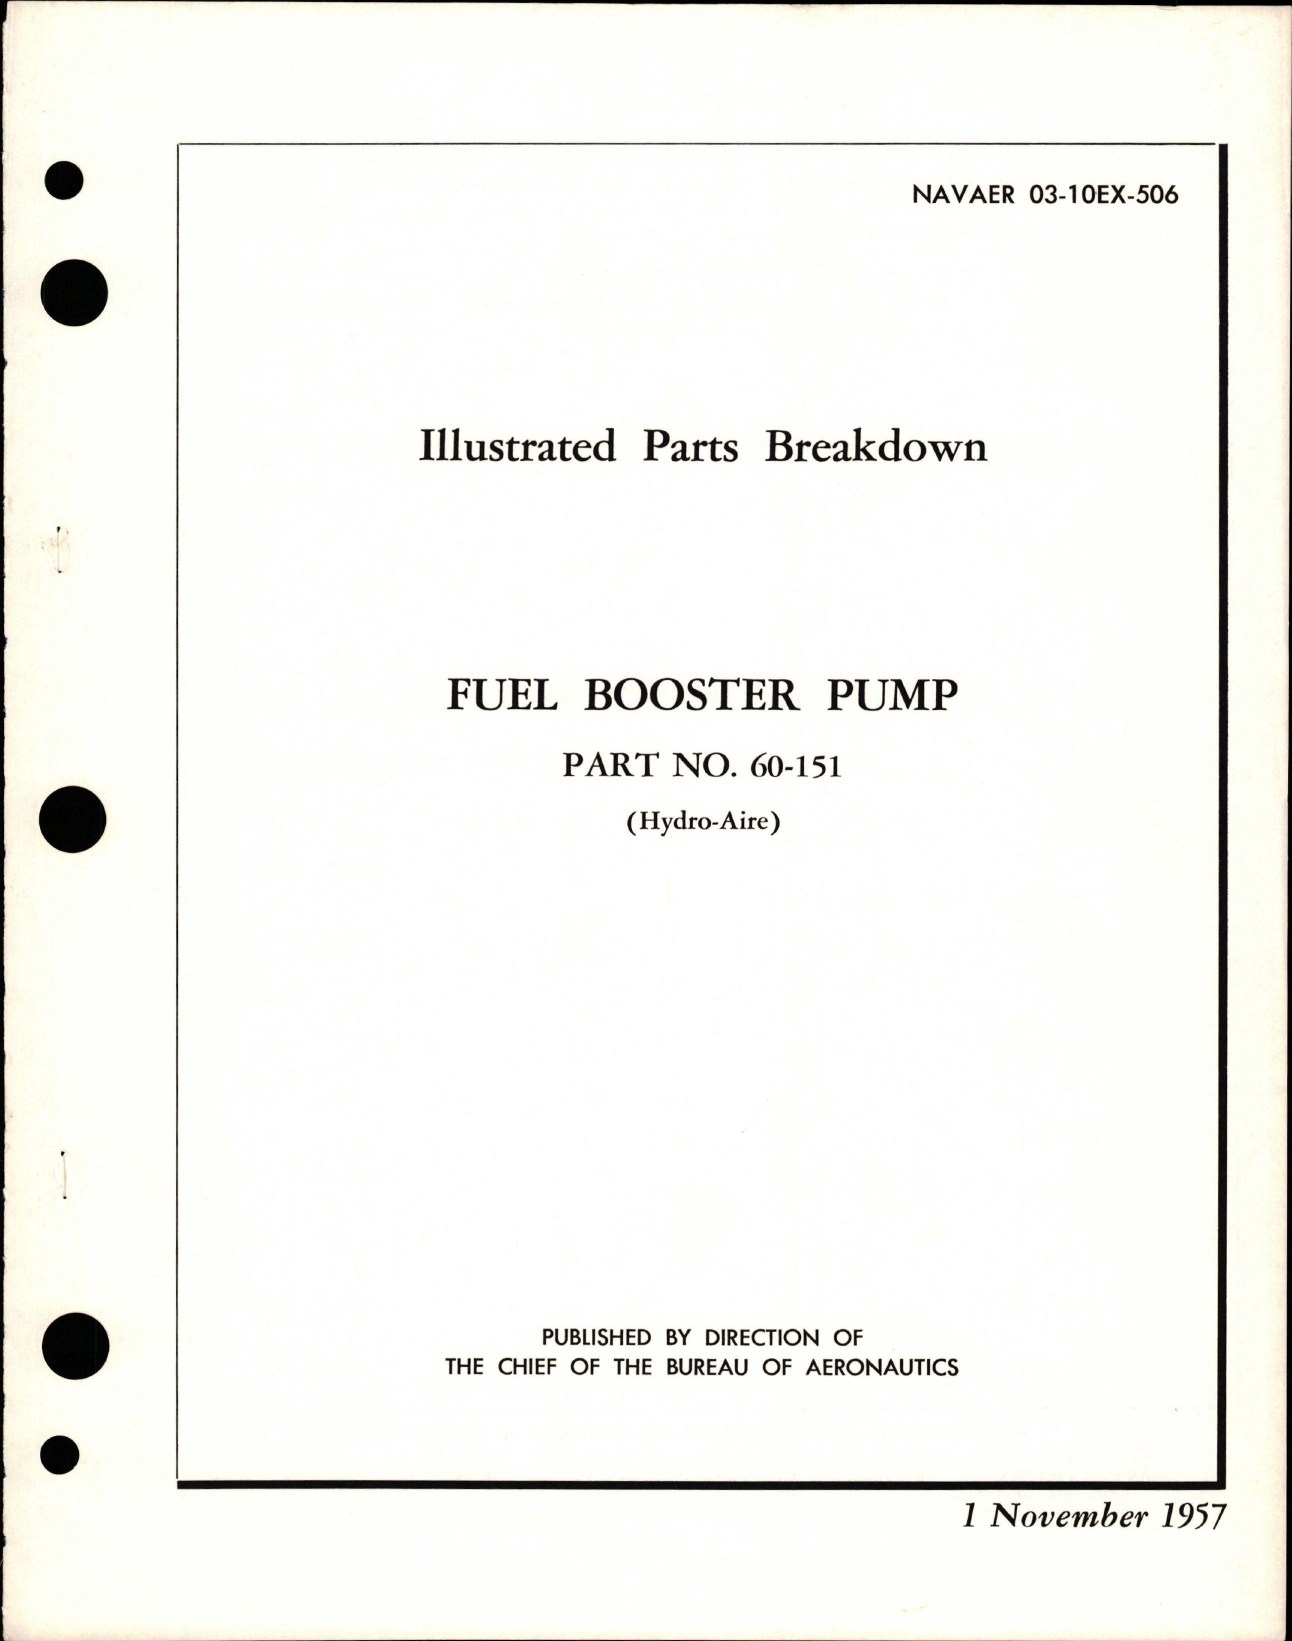 Sample page 1 from AirCorps Library document: Illustrated Parts Breakdown for Fuel Booster Pump - Part 60-151